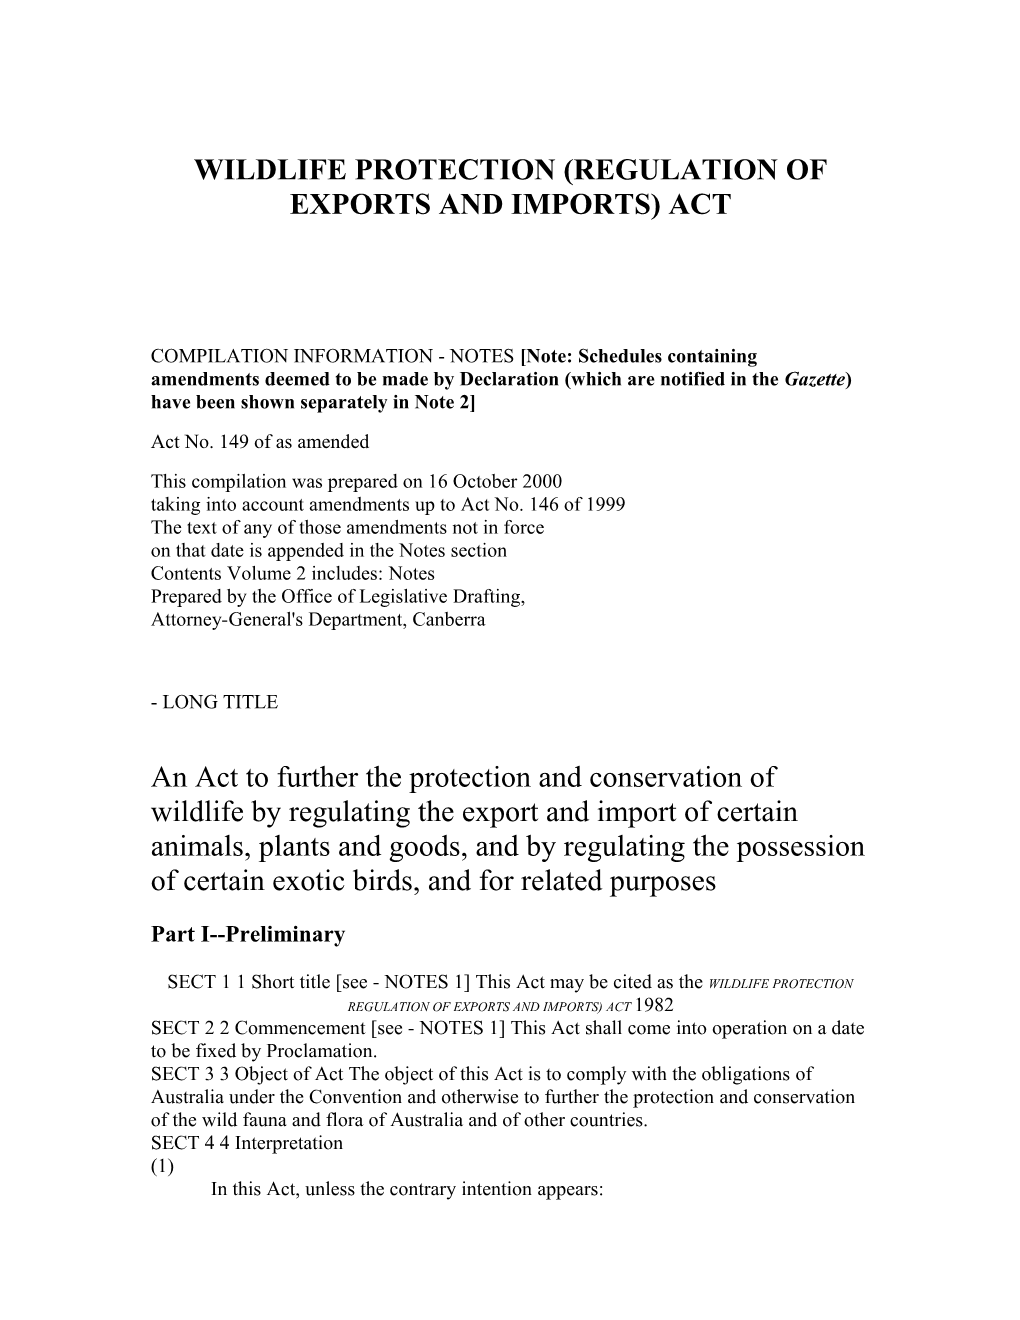 Wildlife Protection (Regulation of Exports and Imports) Act